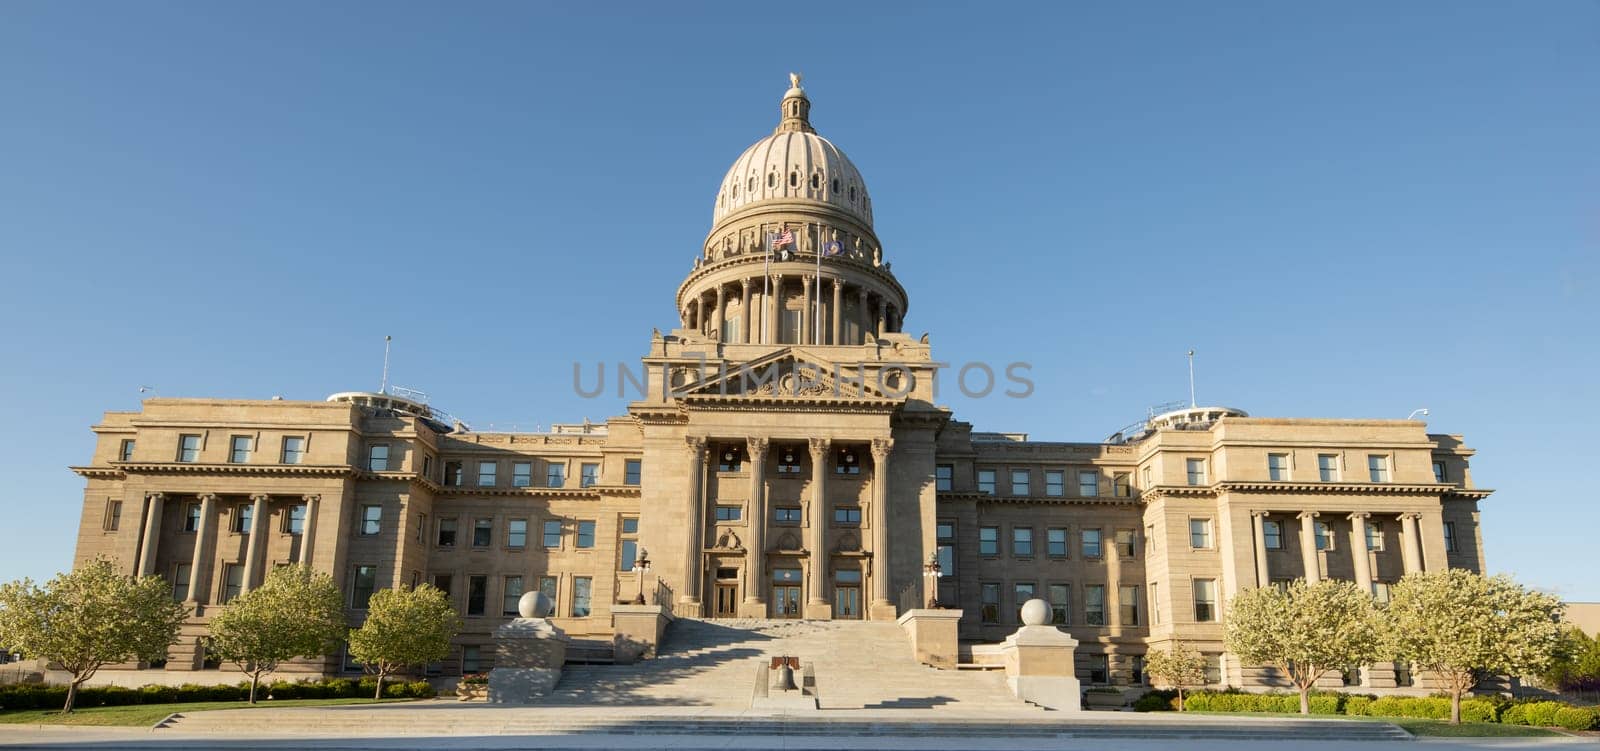 Idaho state capital building during a sunny day